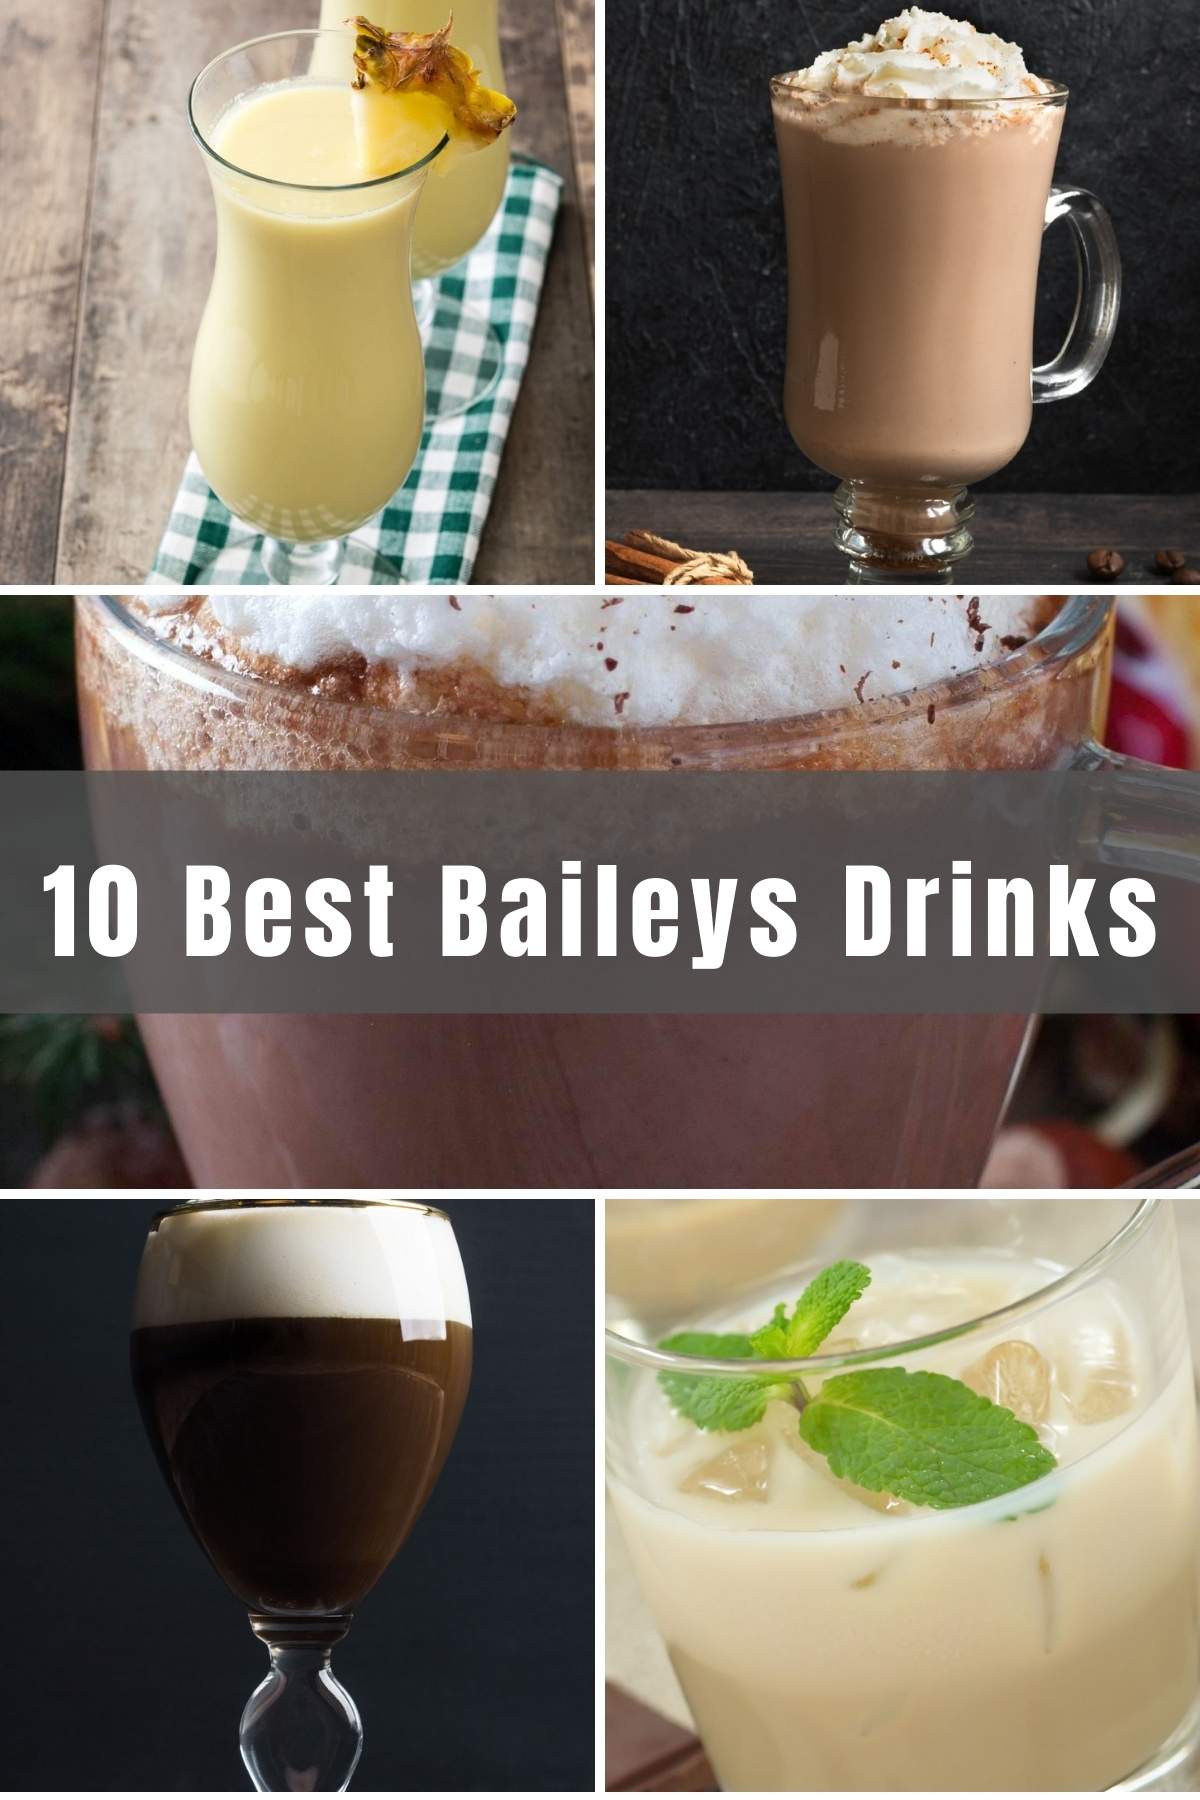 It’s that time of year when you want to treat yourself or your guests to something a little different. Forget the glass of wine, liquor on the rocks, or even beer. Why not give Baileys Irish Cream a try? Below you will find 10 of the Best Baileys Drinks that are perfect for hot days, cold days or whenever you just want to give yourself a little treat.